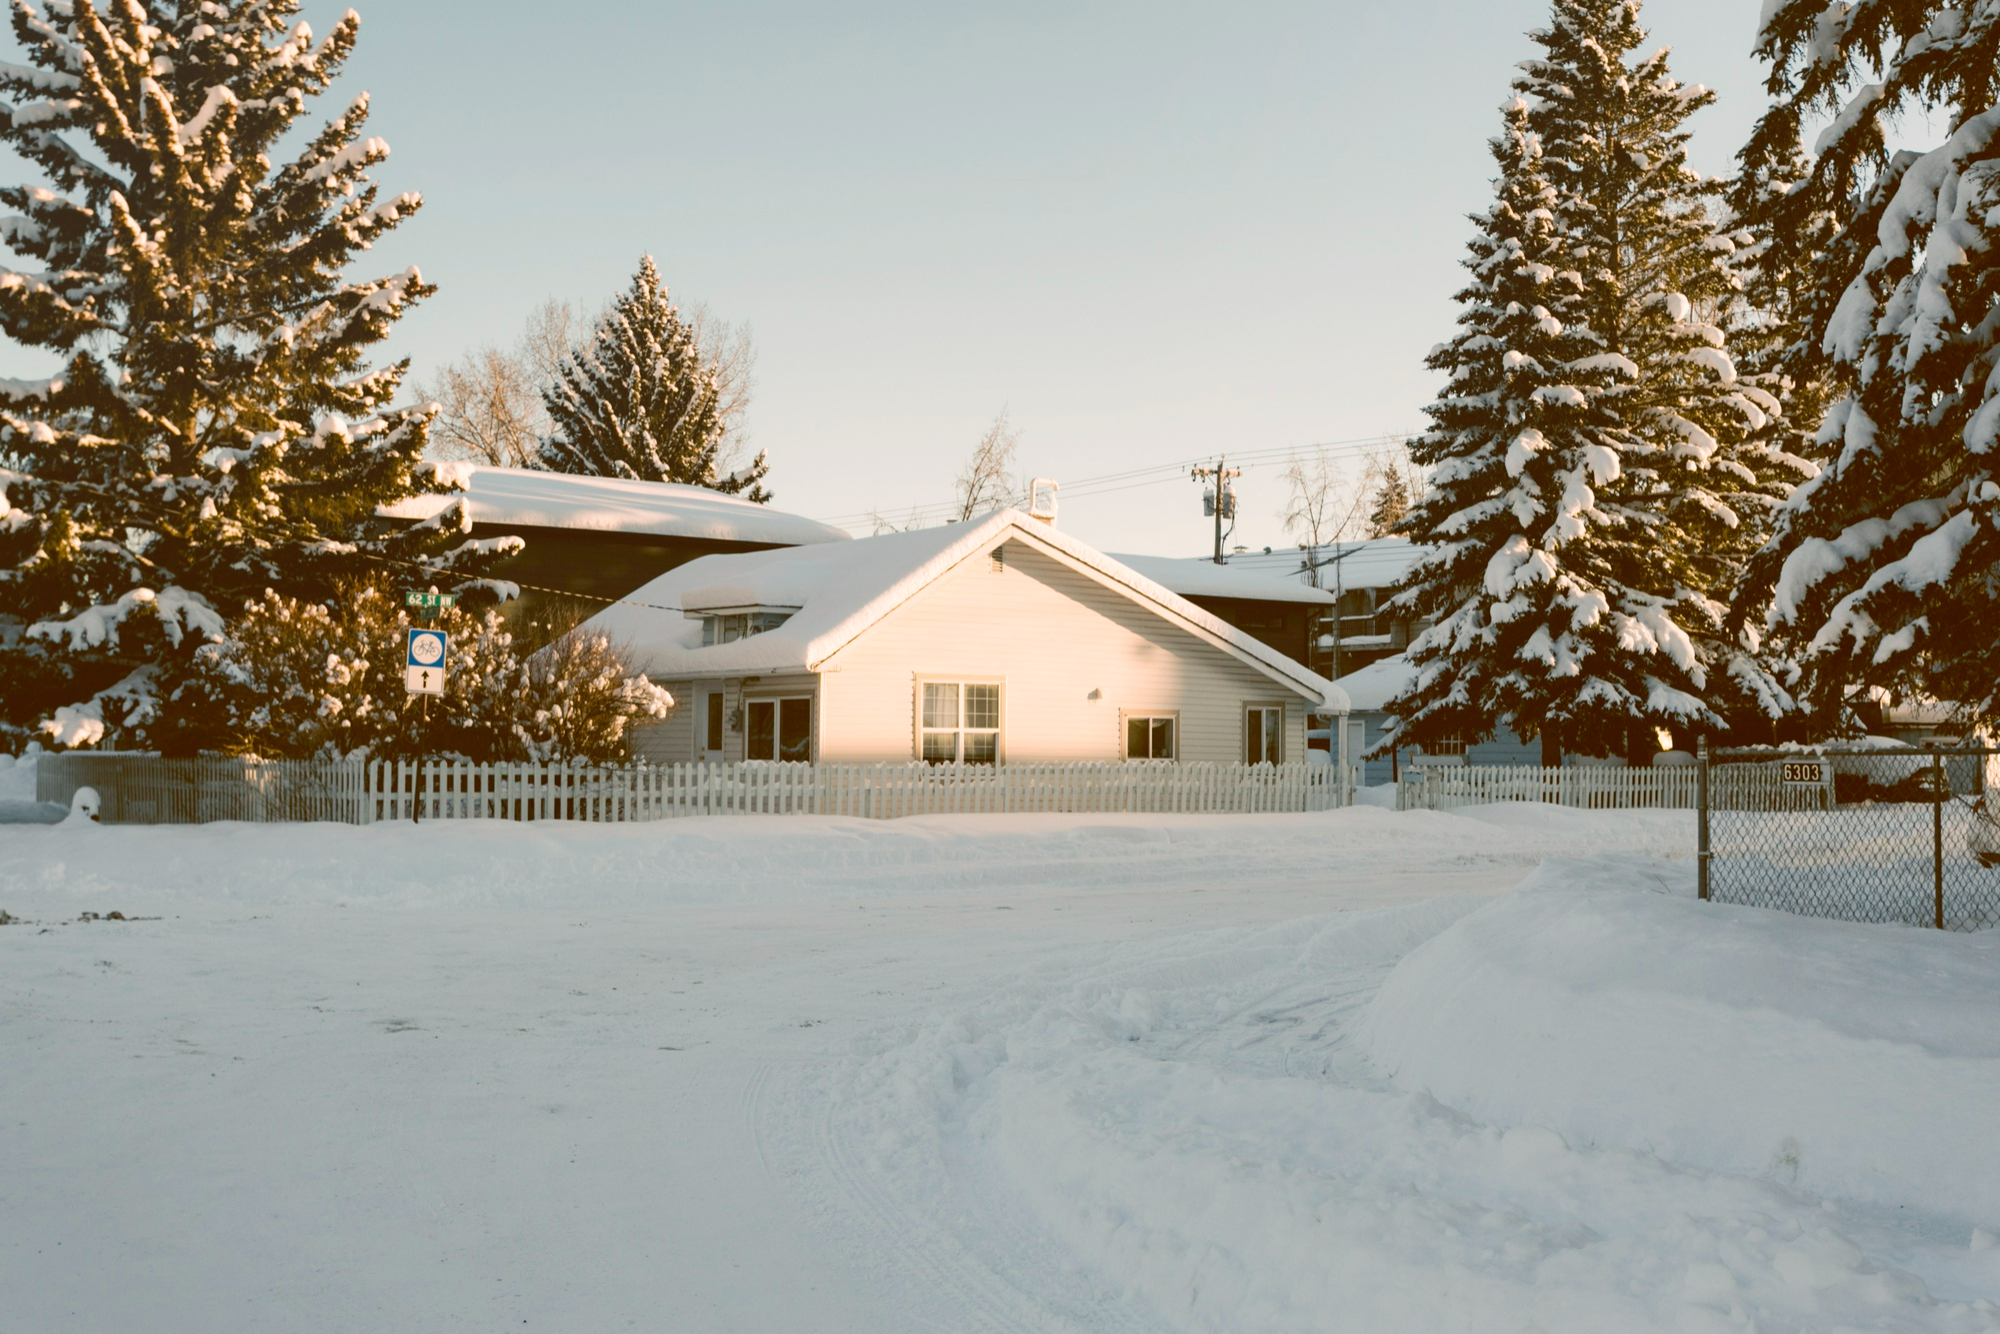 house-with-snowy-pine-trees-winter-beginning-to-melt-and-experience-spring-thaw-and protecting-your-home-from-water-damage